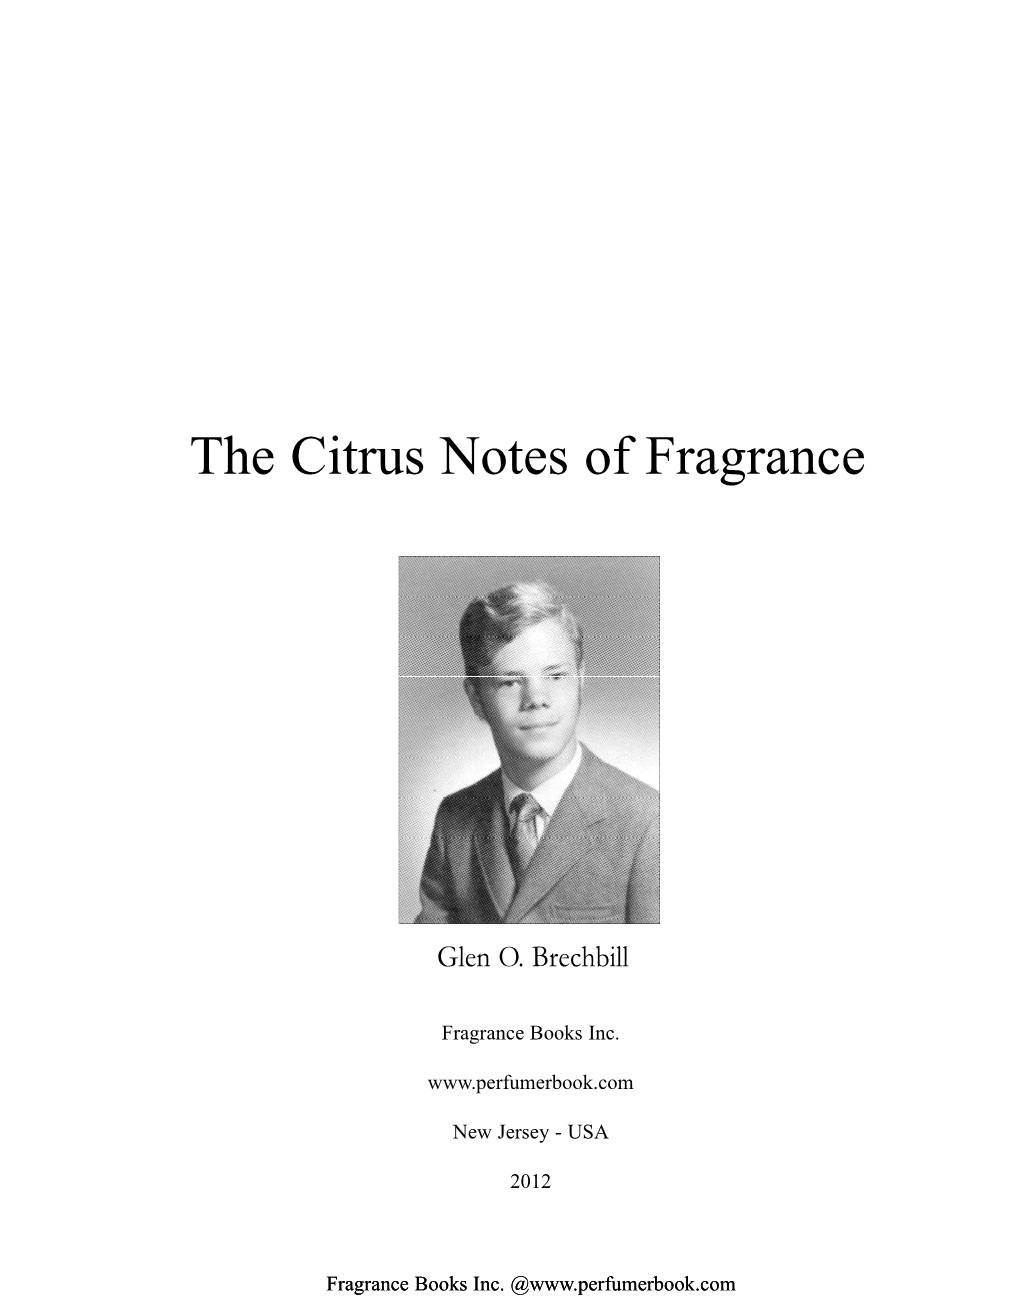 The Citrus Notes of Fragrance, 2012